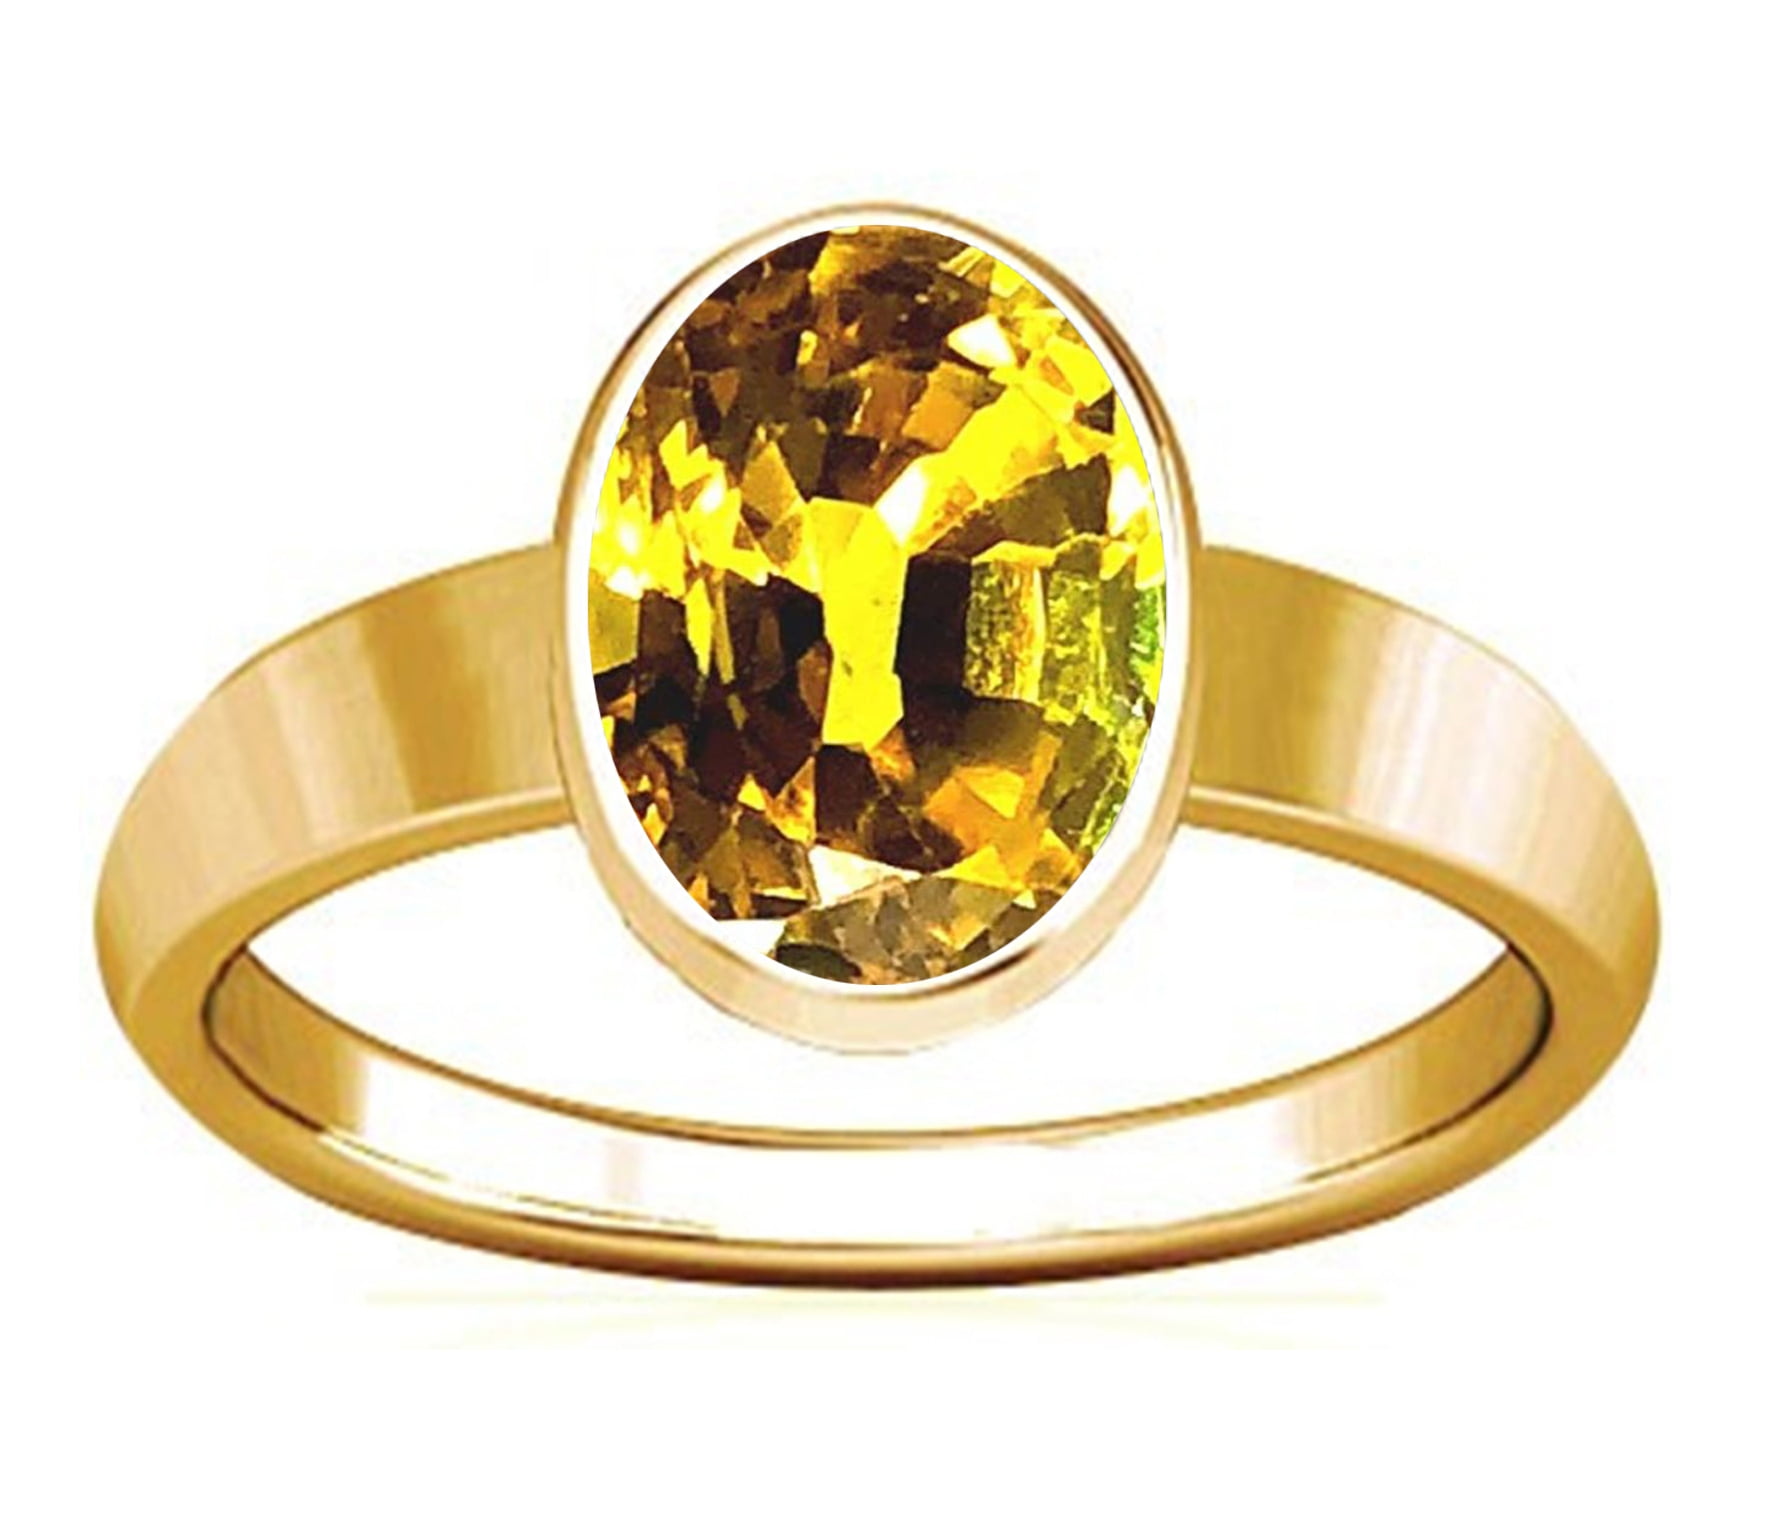 Yellow Sapphire Ring Benefits as per Vedic Astrology